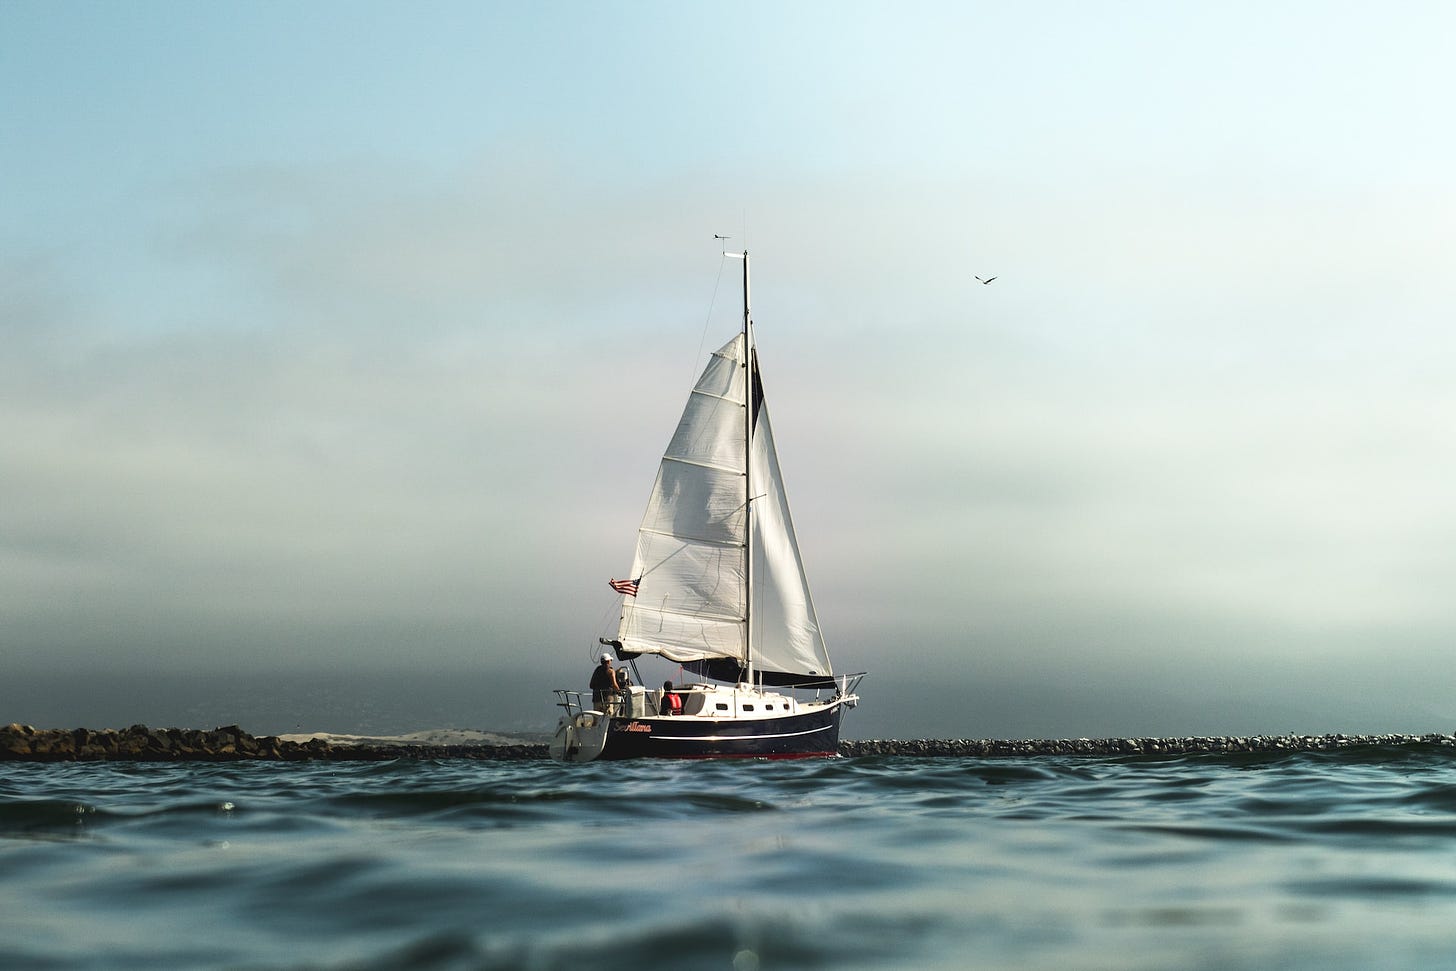 A sailboat sailing on a calm ocean, with a clear blue sky above. The image represents the journey of life, and the importance of embracing the unknown.